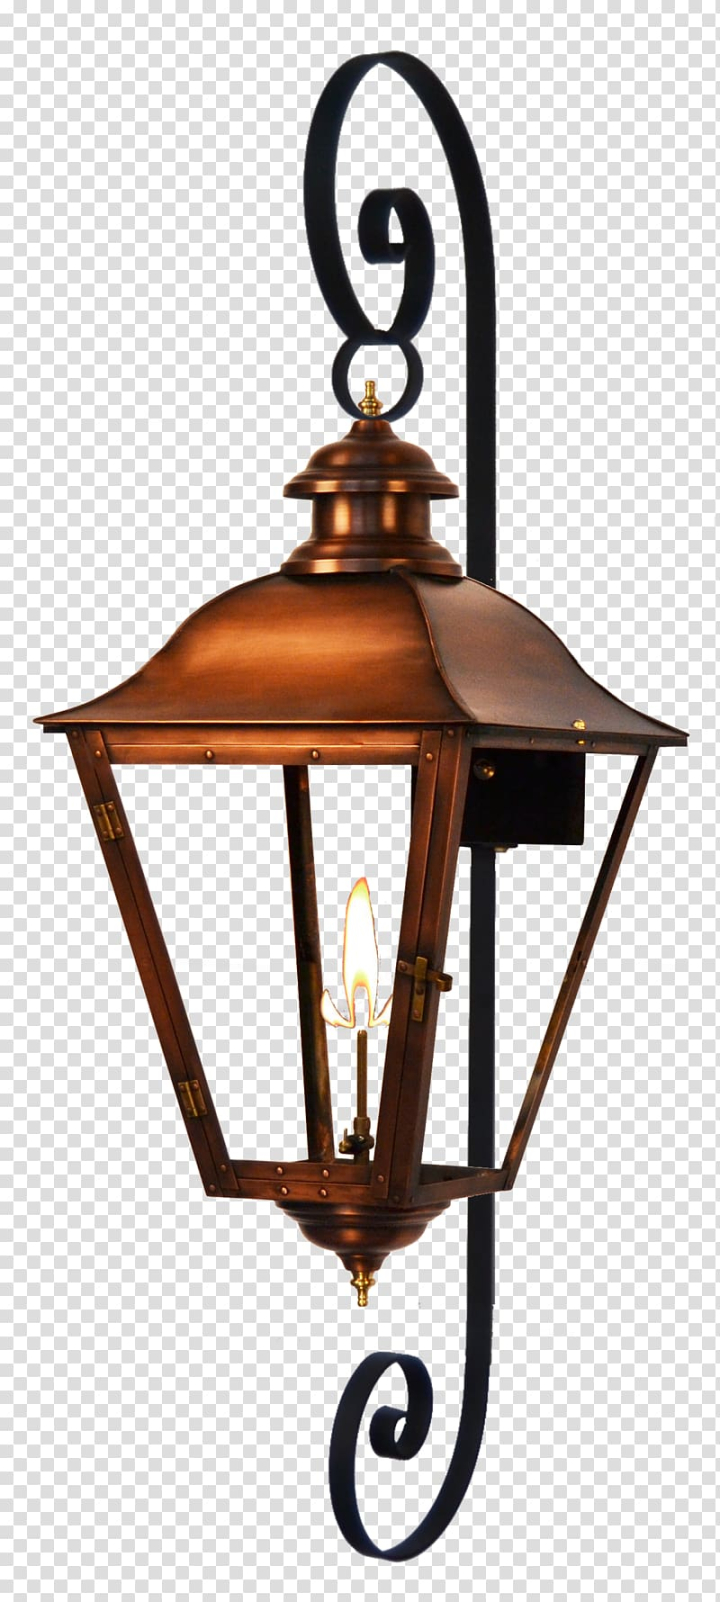 gas,lighting,light,fixture,lantern,sconce,light fixture,led lamp,electric light,landscape lighting,gas burner,nature,natural gas,lightemitting diode,ceiling fixture,lantern light effect,incandescent light bulb,gas lighting,coppersmith,wall,png clipart,free png,transparent background,free clipart,clip art,free download,png,comhiclipart